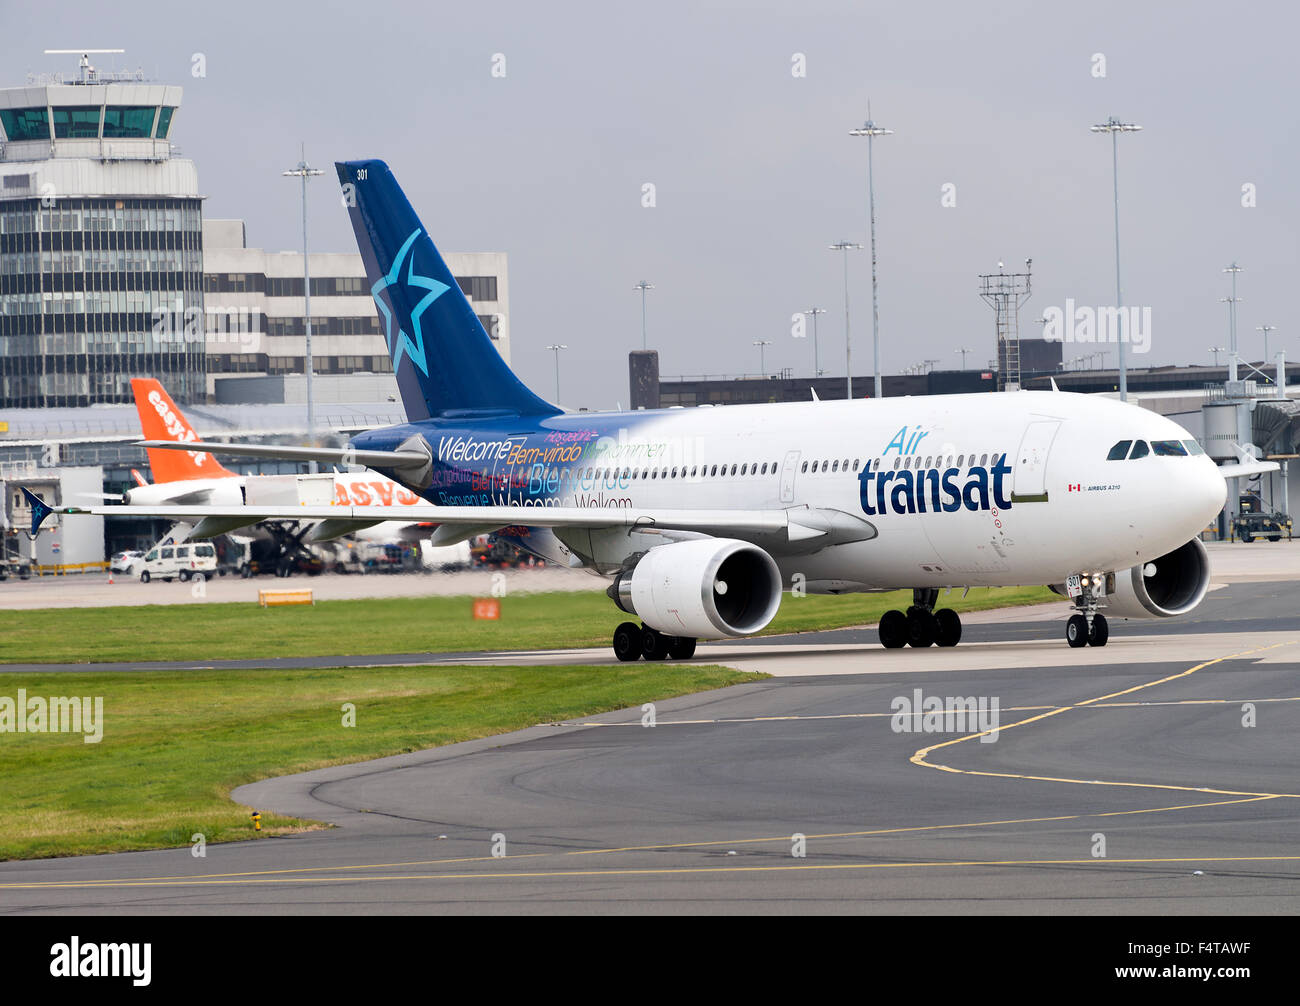 Air Transat Airline Airbus A310-304 Airliner Taxiing for Departure at Manchester International Airport England United Kingdom UK Stock Photo